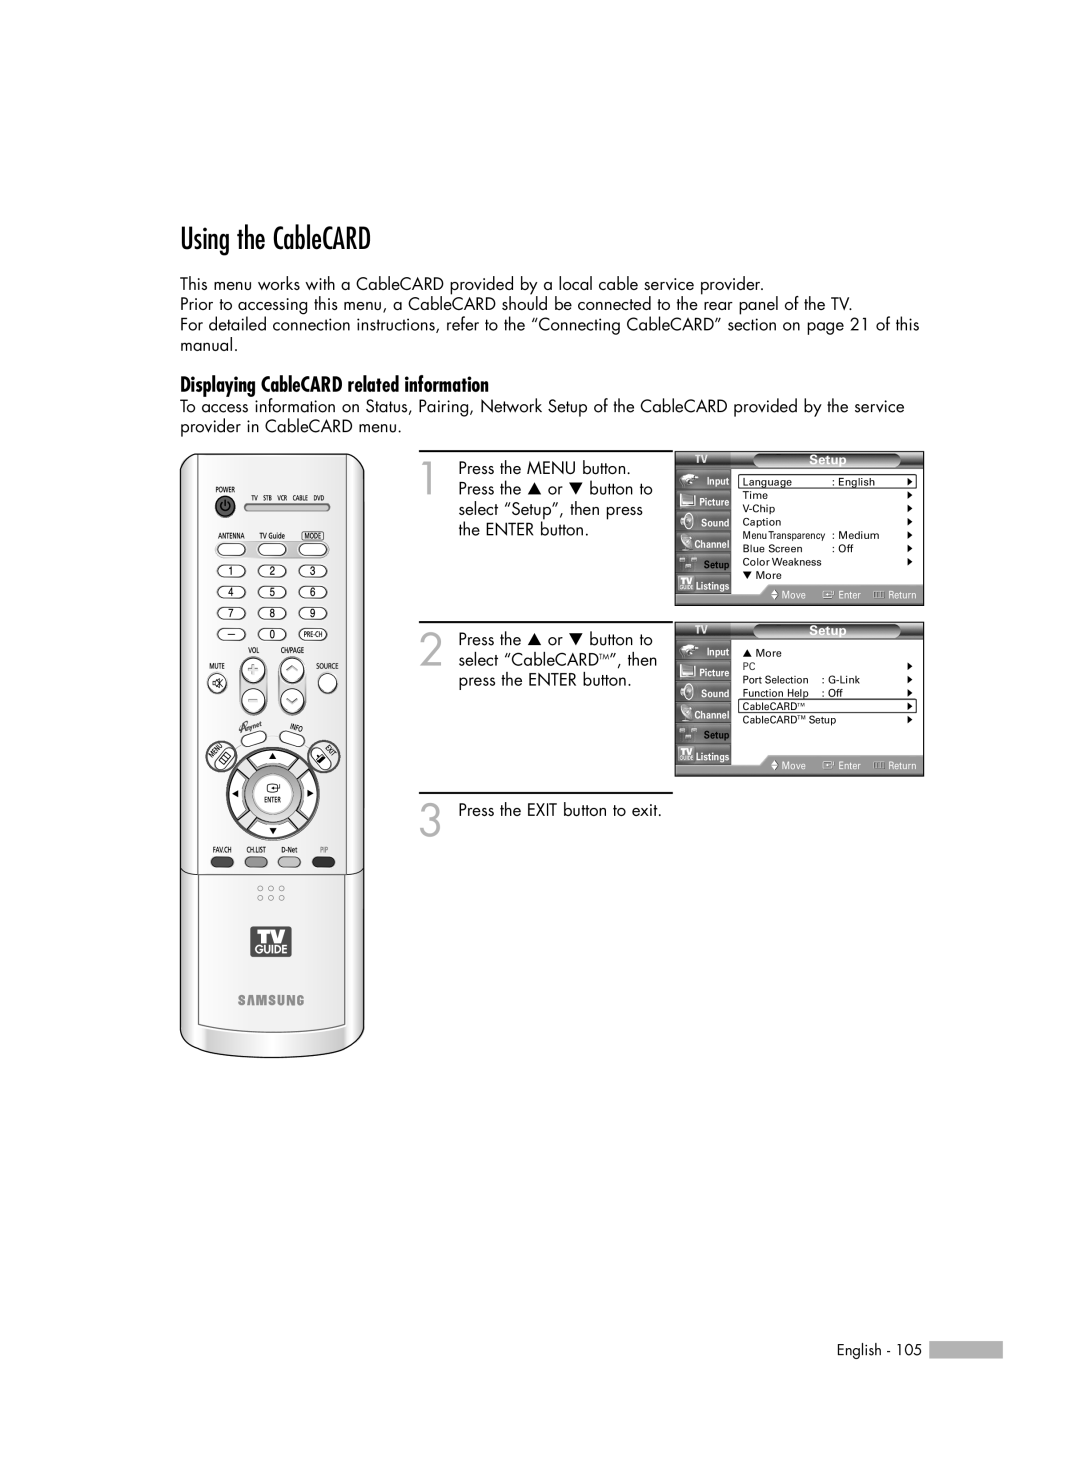 Samsung HL-R6178W, HL-R5678W, HL-R7178W manual Using the CableCARD, Displaying CableCARD related information 